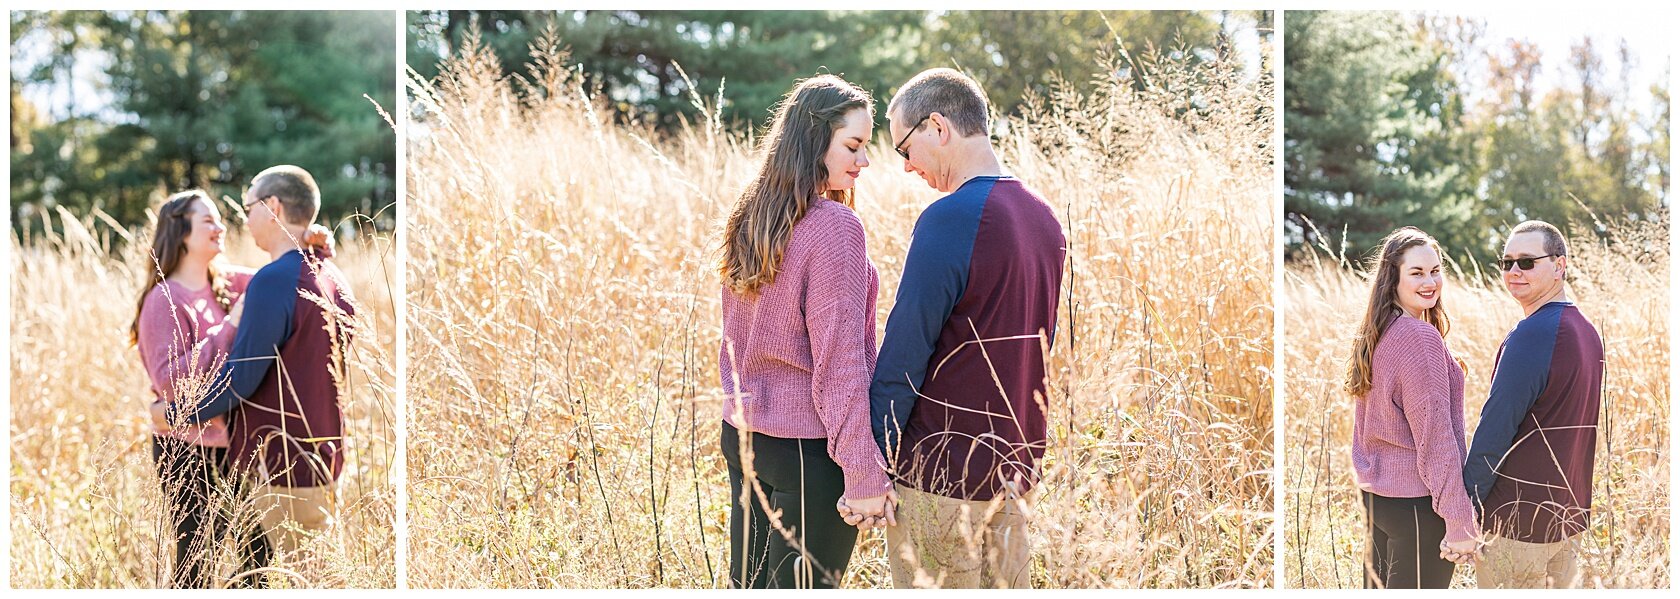 Clare Zach Quiet Waters Park Annapolis Engagement Session November 2019 Living Radiant Photography_0023.jpg